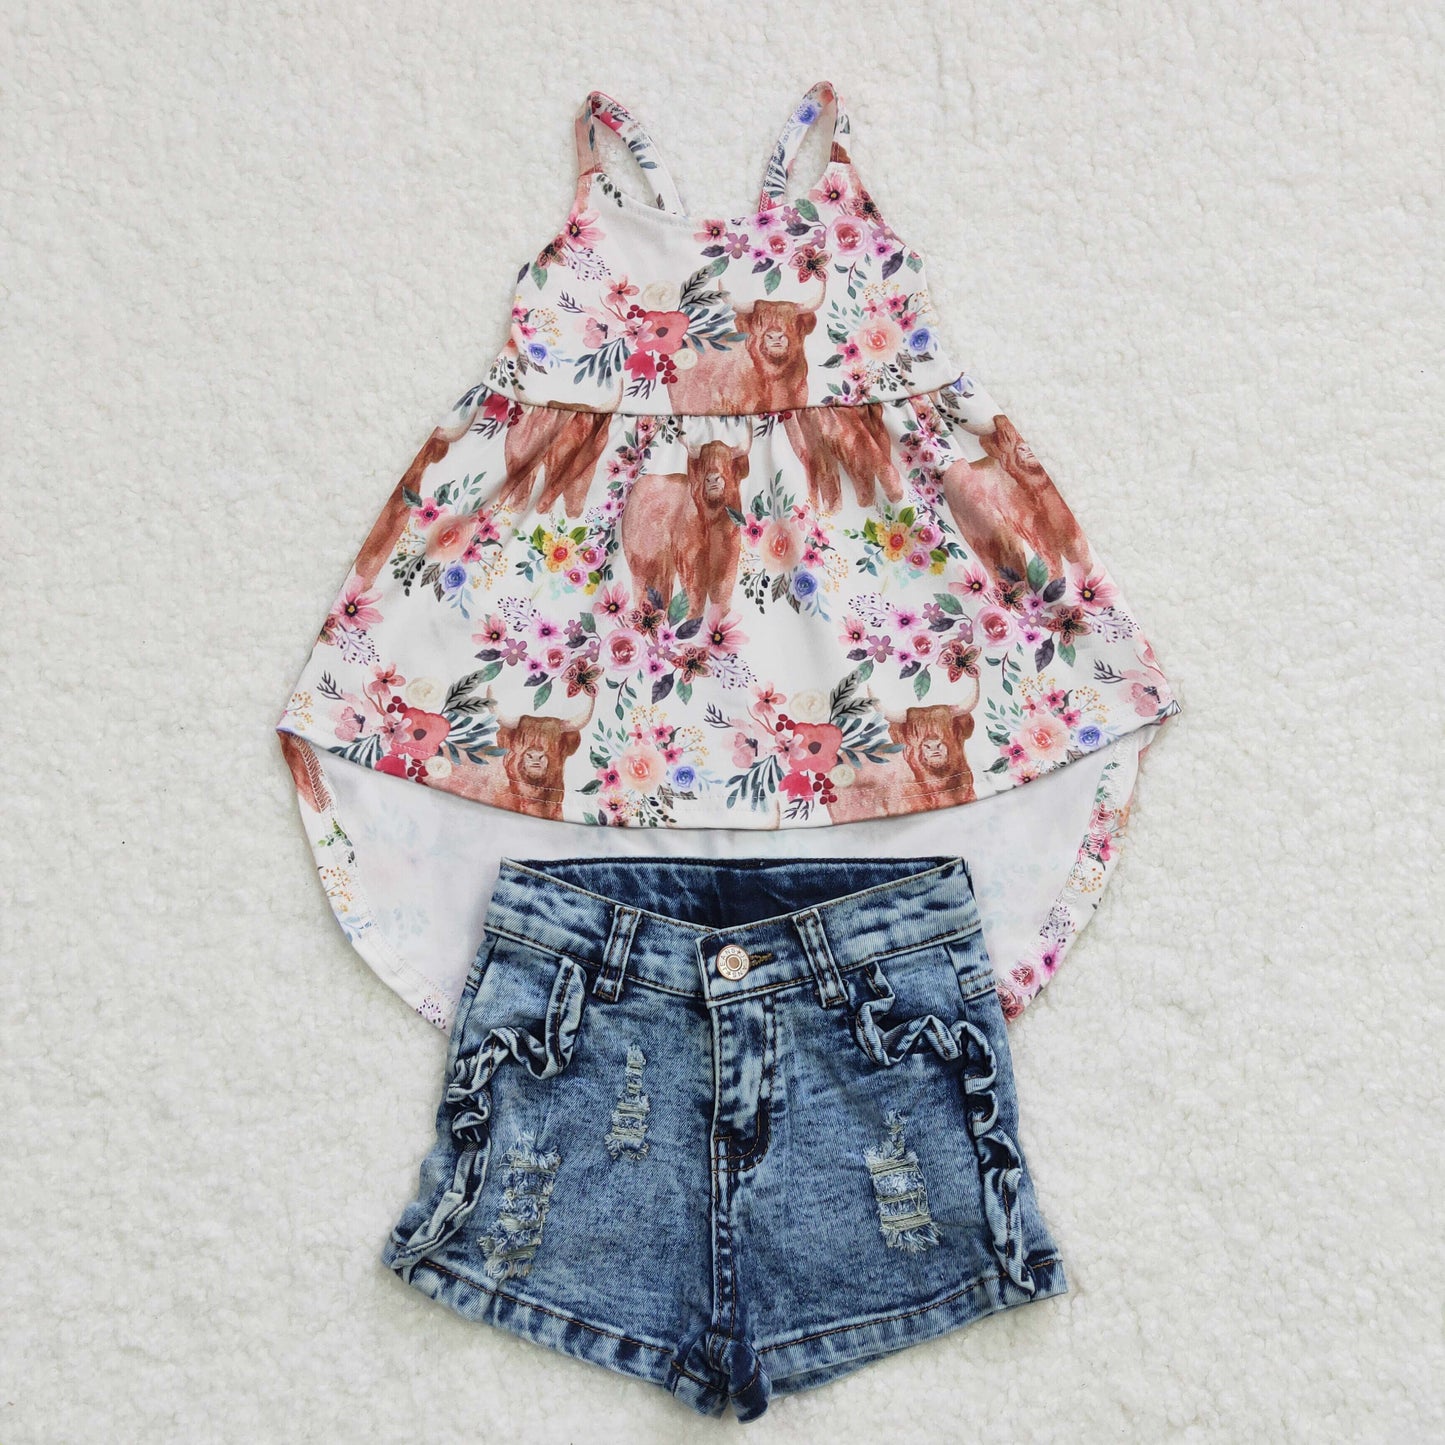 highland cow high to low top denim shorts 2pcs summer outfit